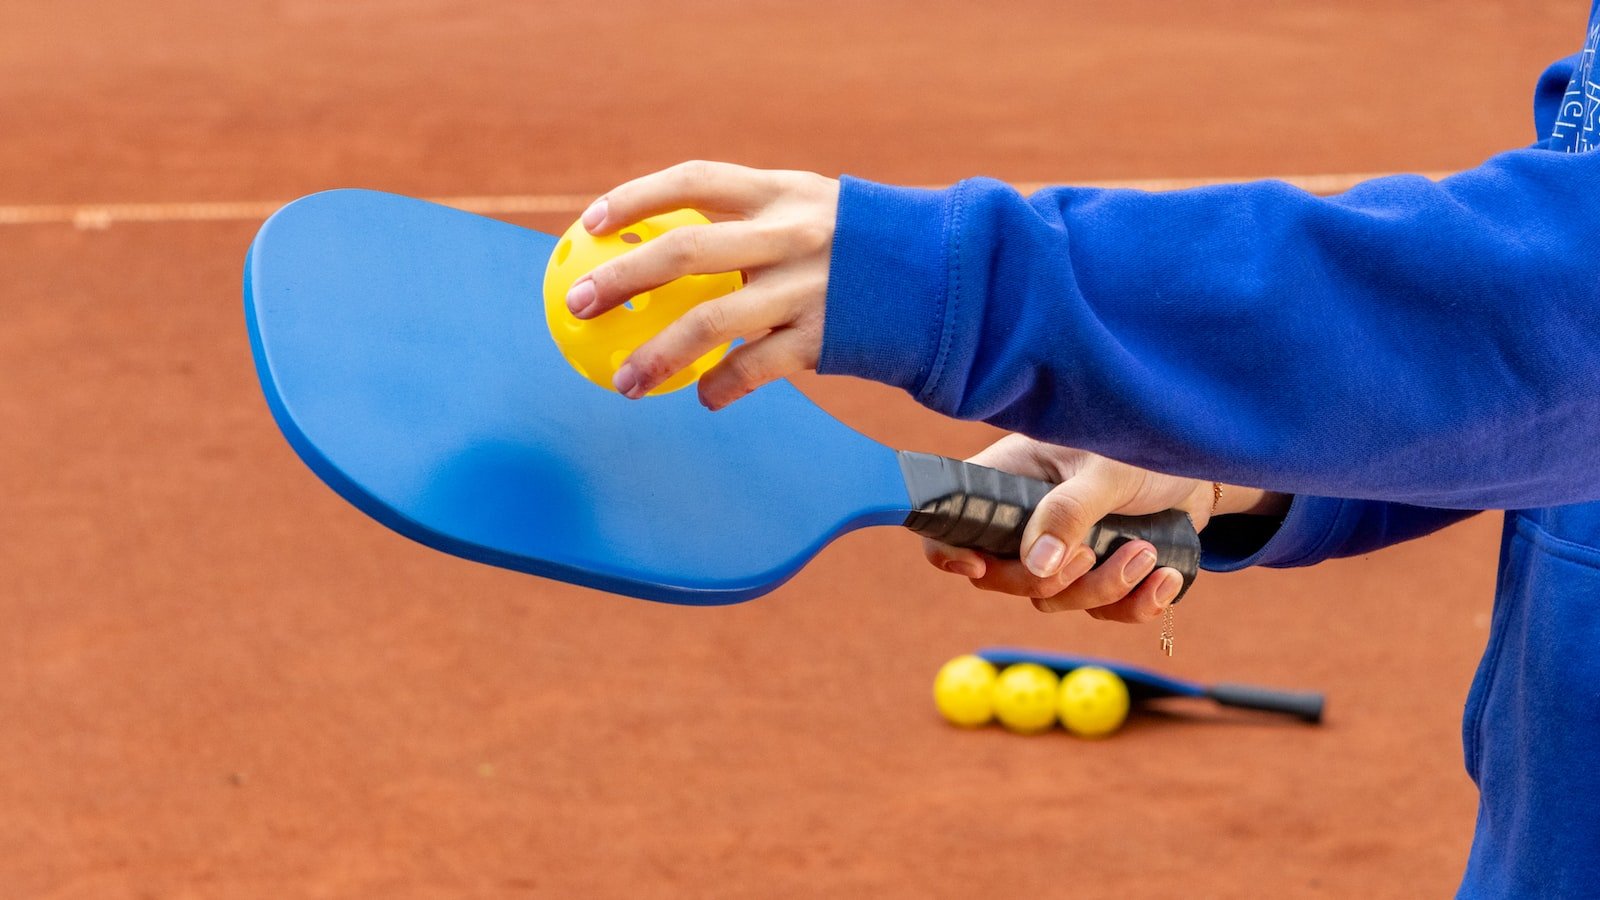 The Healing Power of Pickleball: Physical and Emotional Benefits